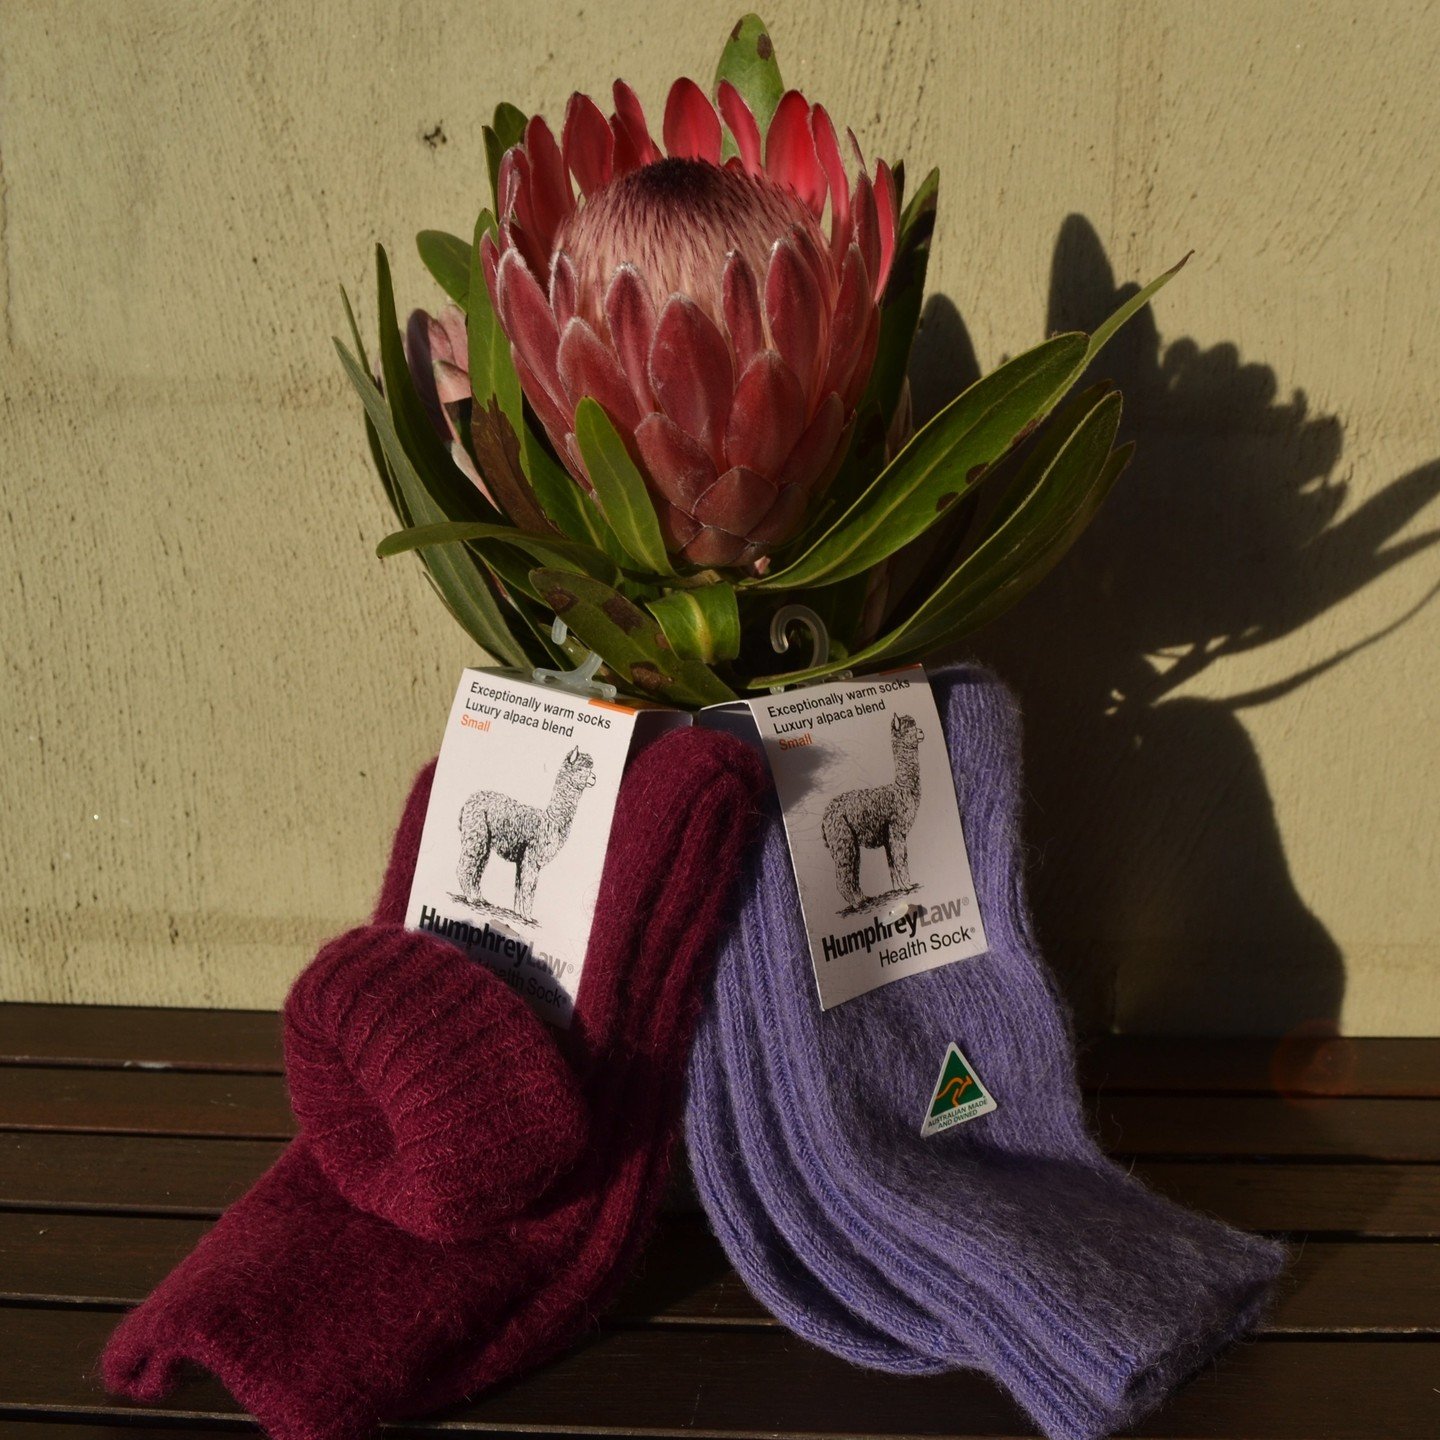 As the days shorten and the temperature drops, now is just the right time to experience the comfort and joy of pure alpaca yarn, handknits and socks.
Take a peek at our online shop for more ideas www.clifden.com.au/shop

#naturalfibres 
#blackalpaca
